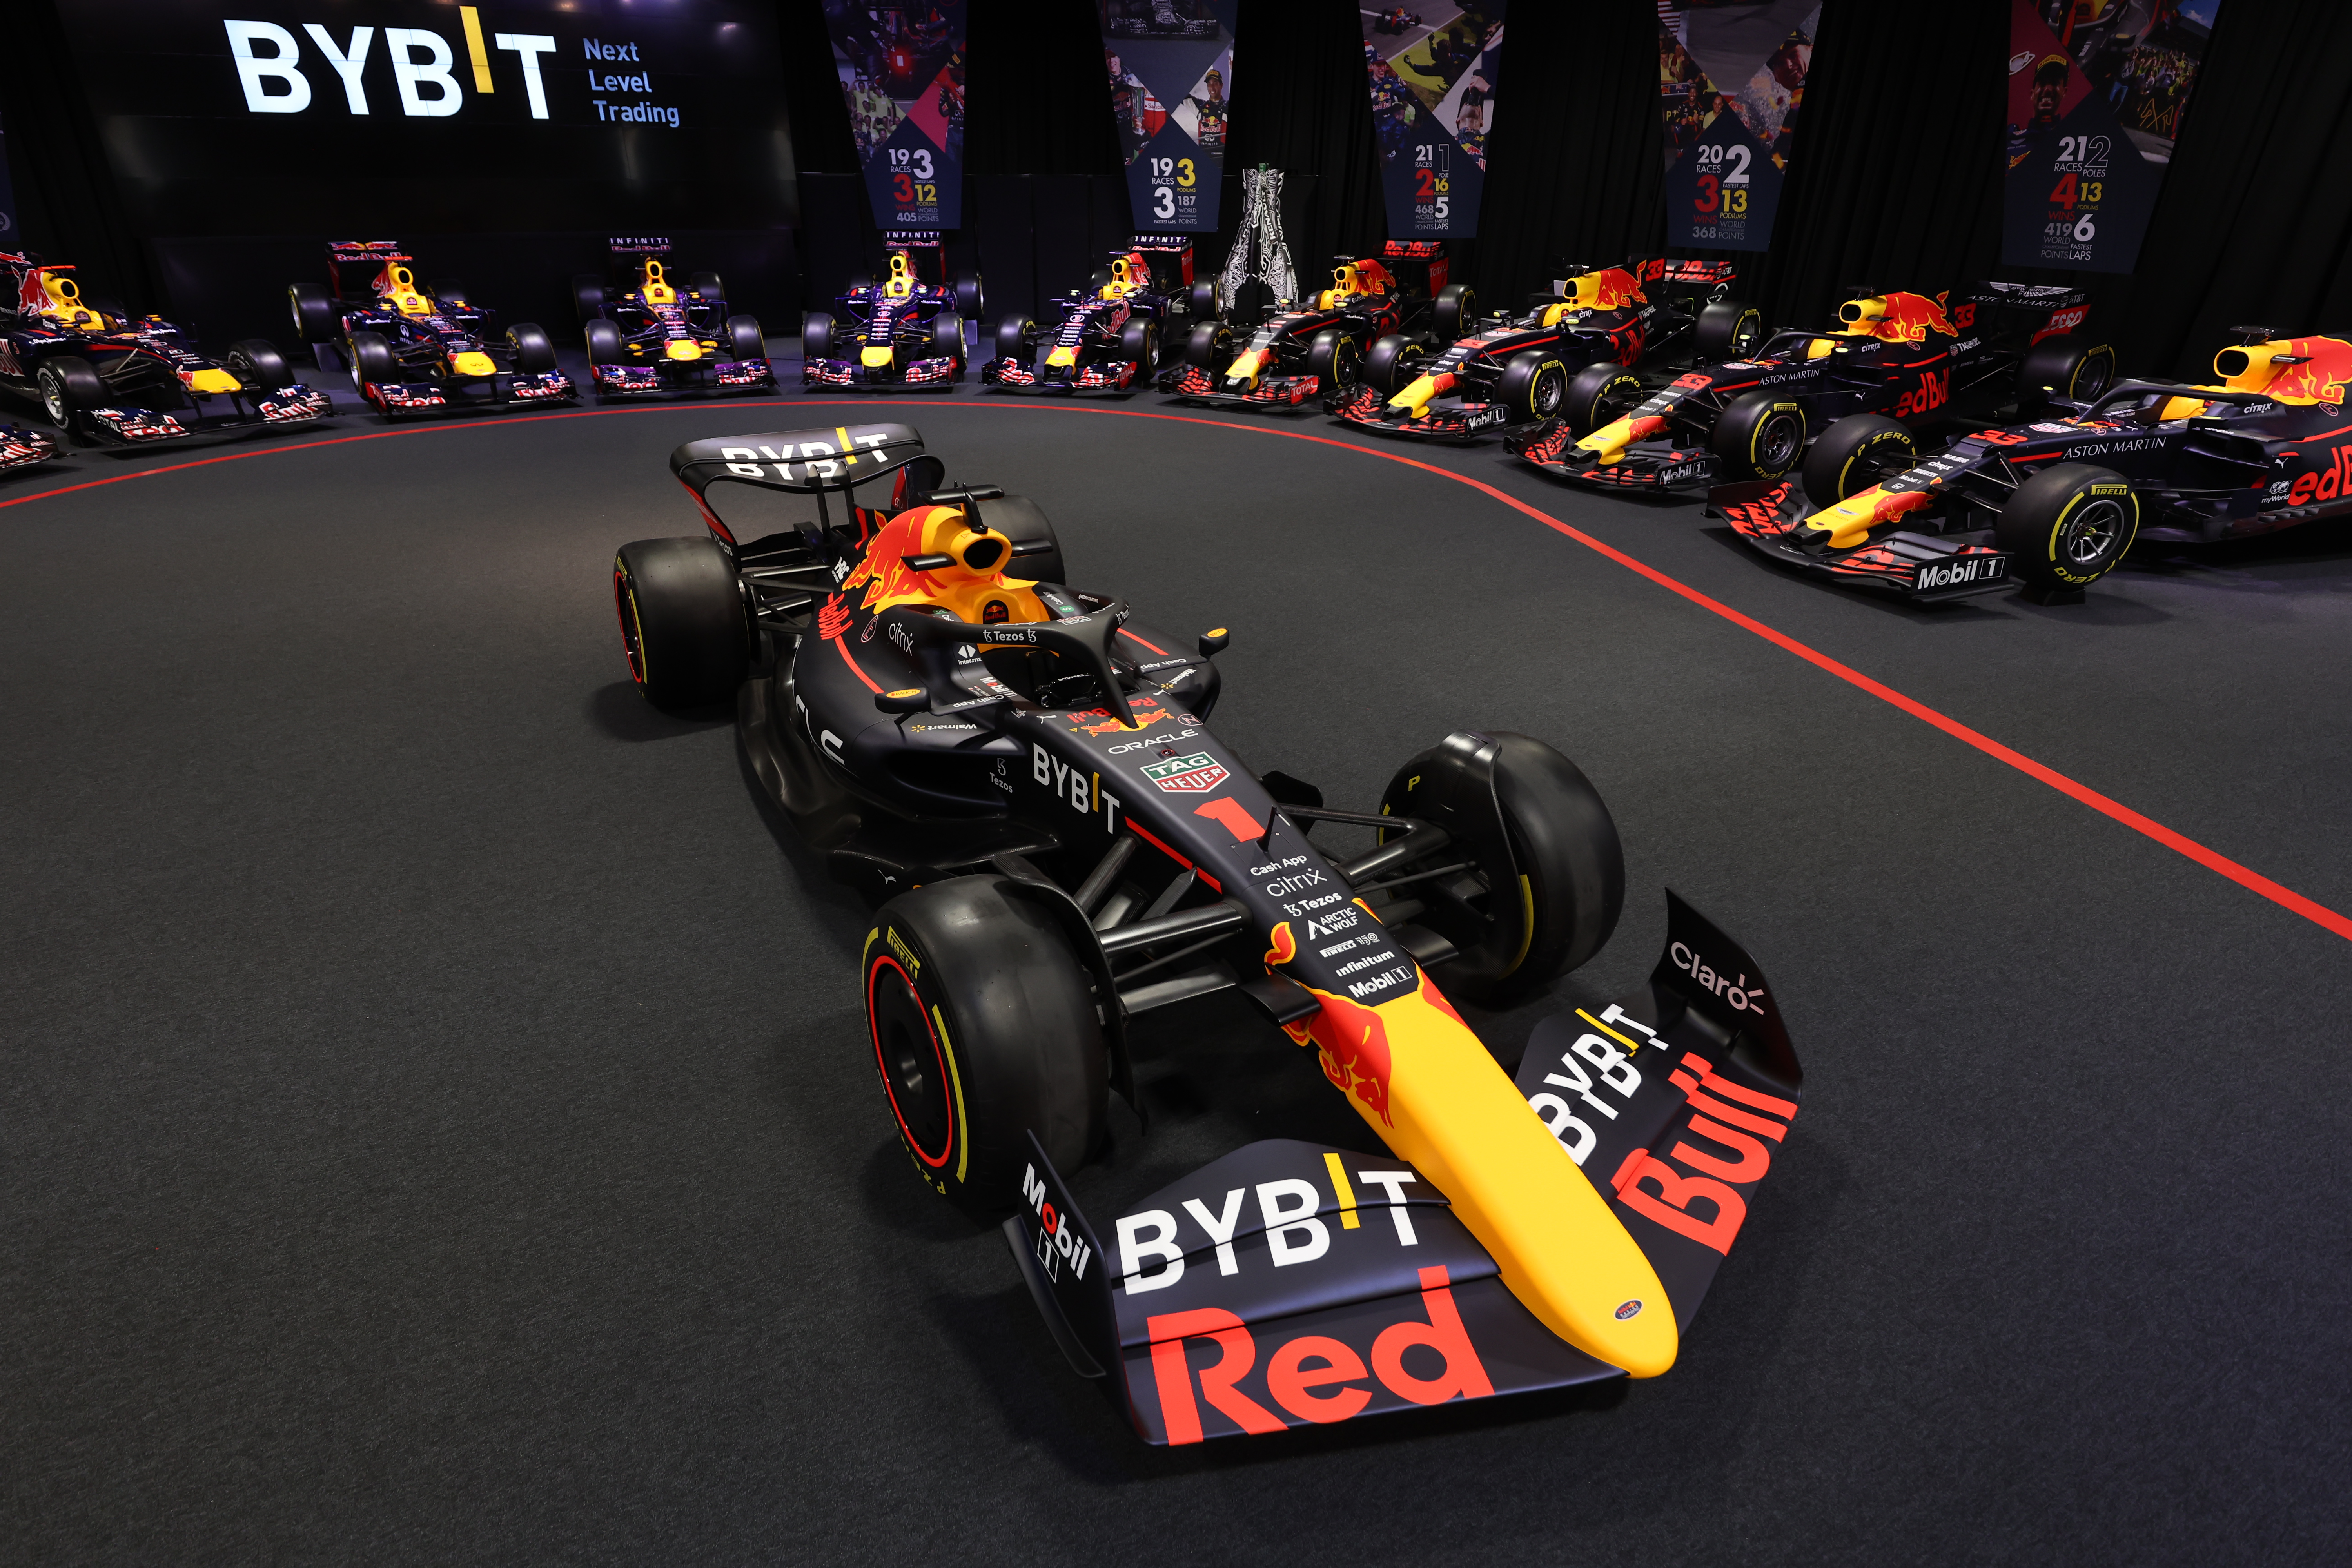 ByBit Million Dollar deal with Red Bull Racing